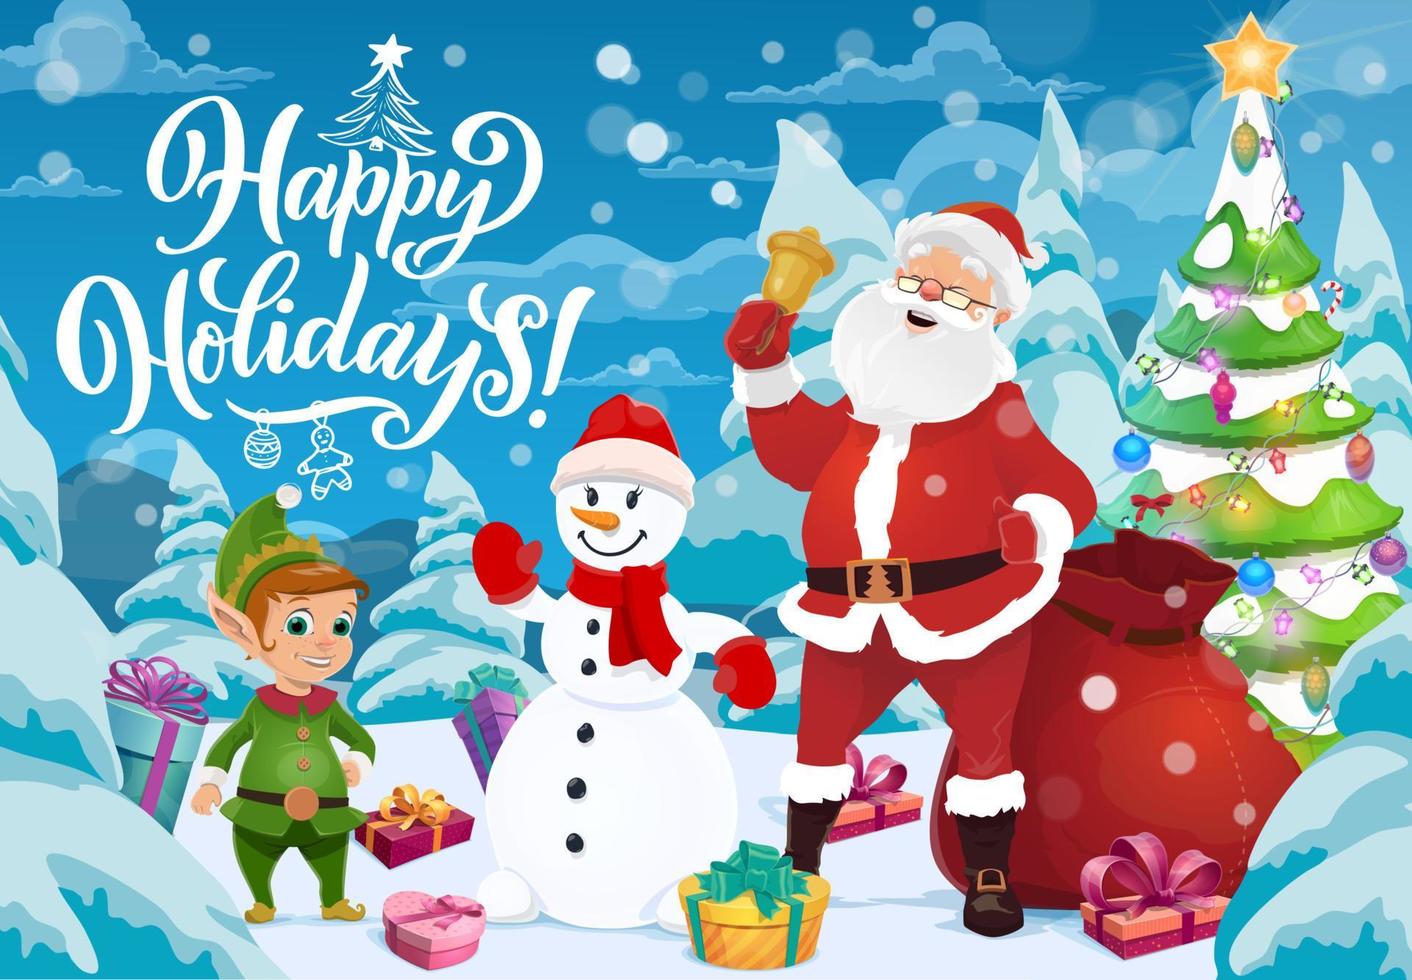 Santa with Christmas bell, gifts, snowman and elf vector